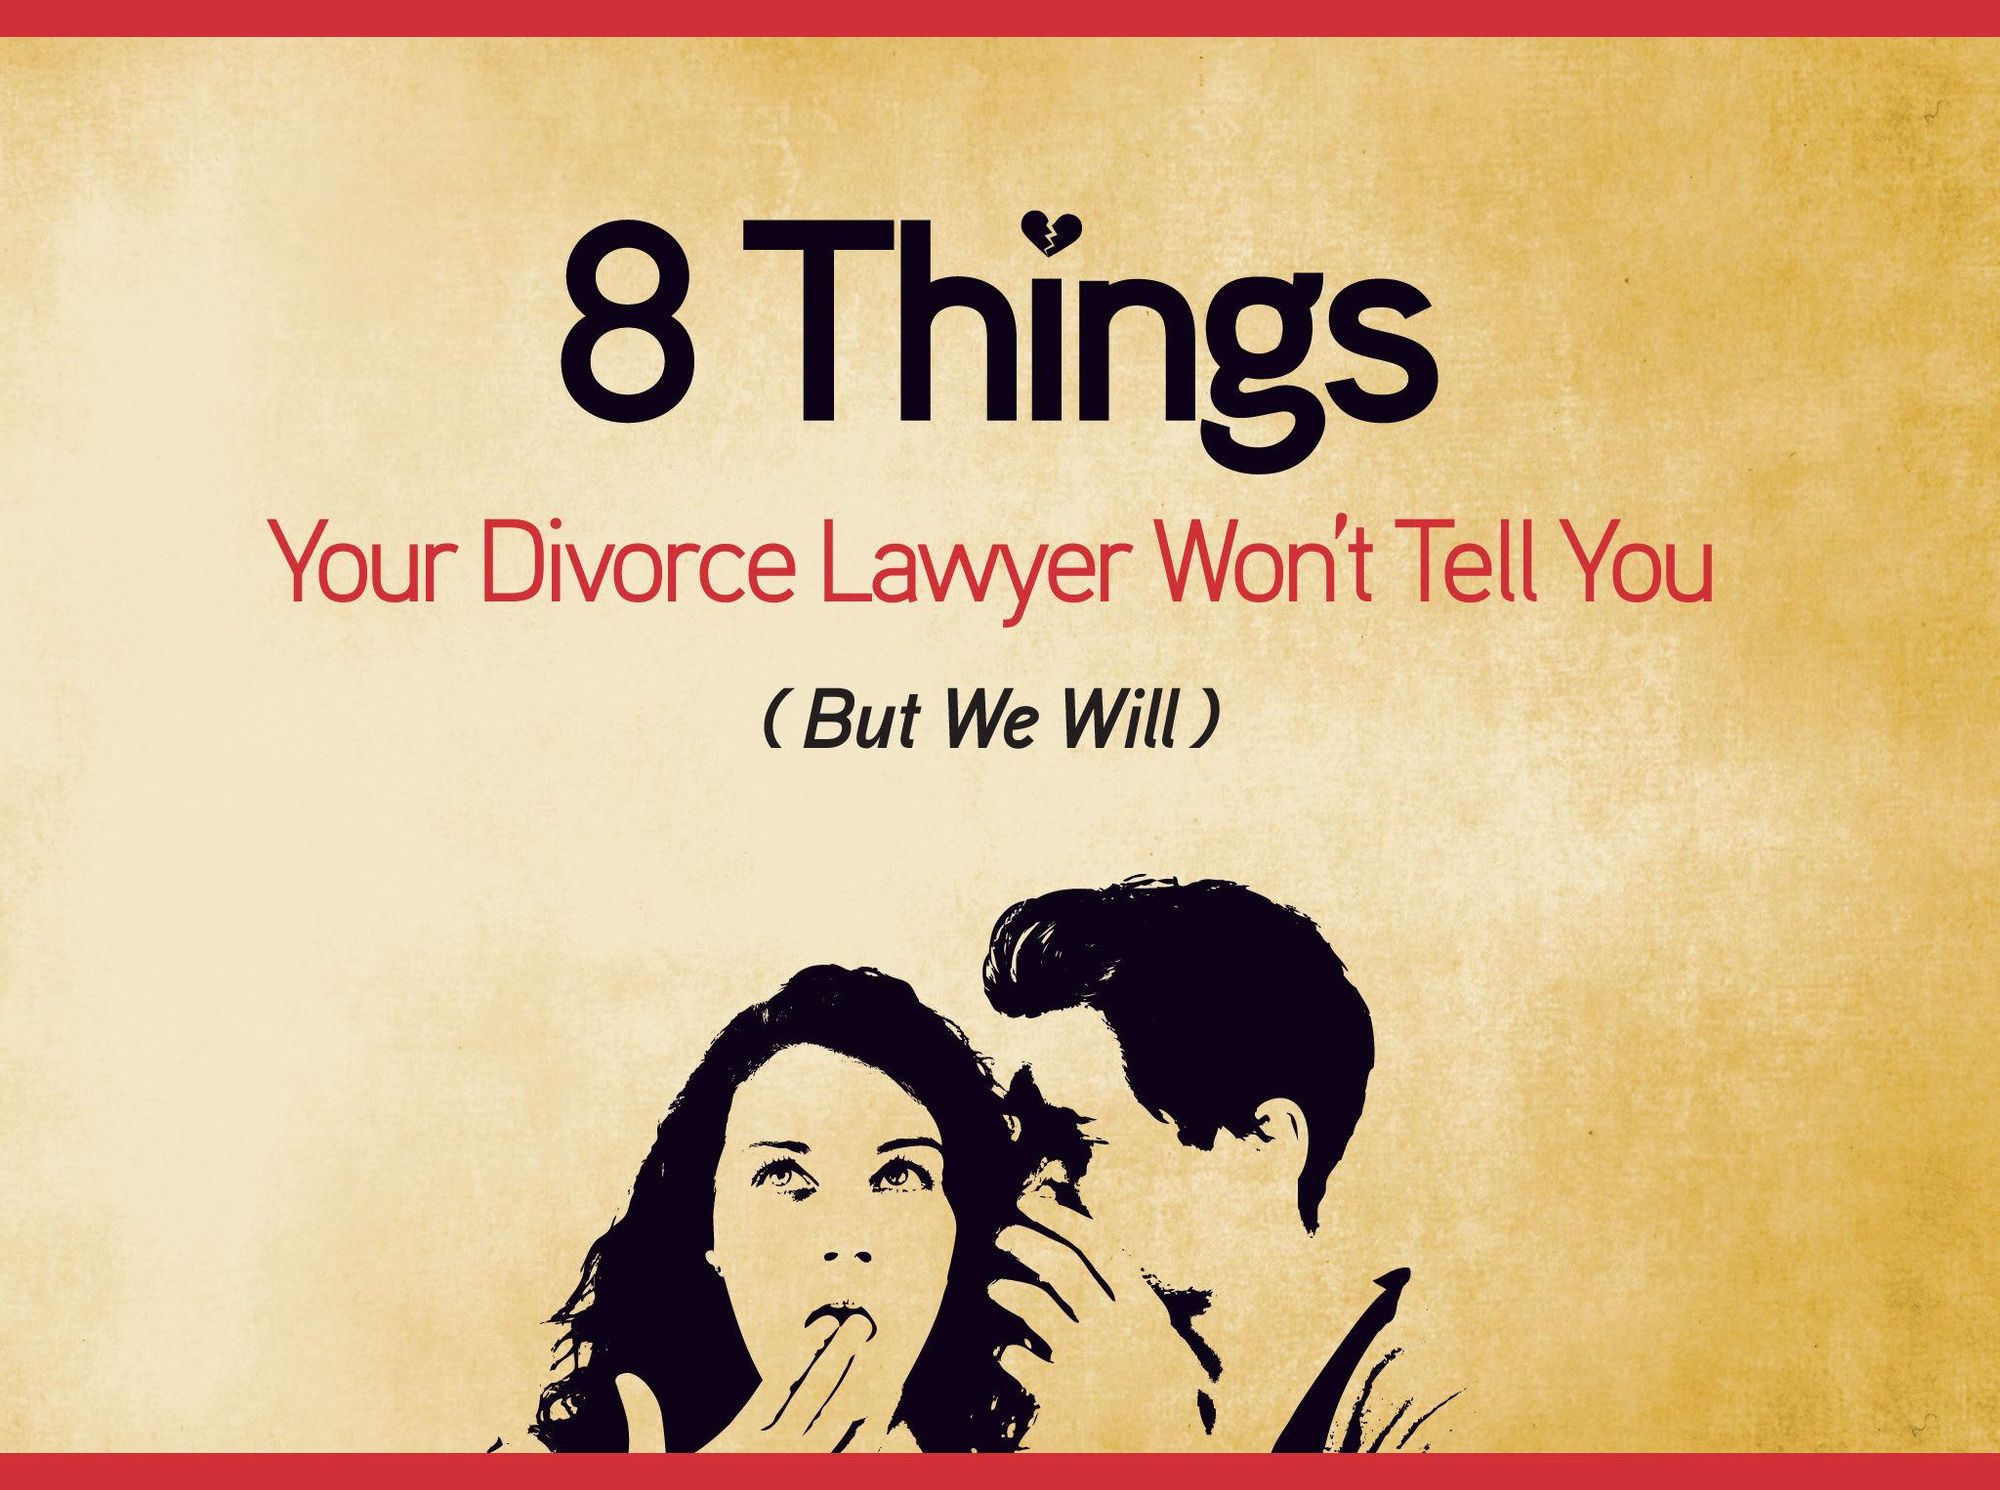 8 things your divorce lawyer won't tell you